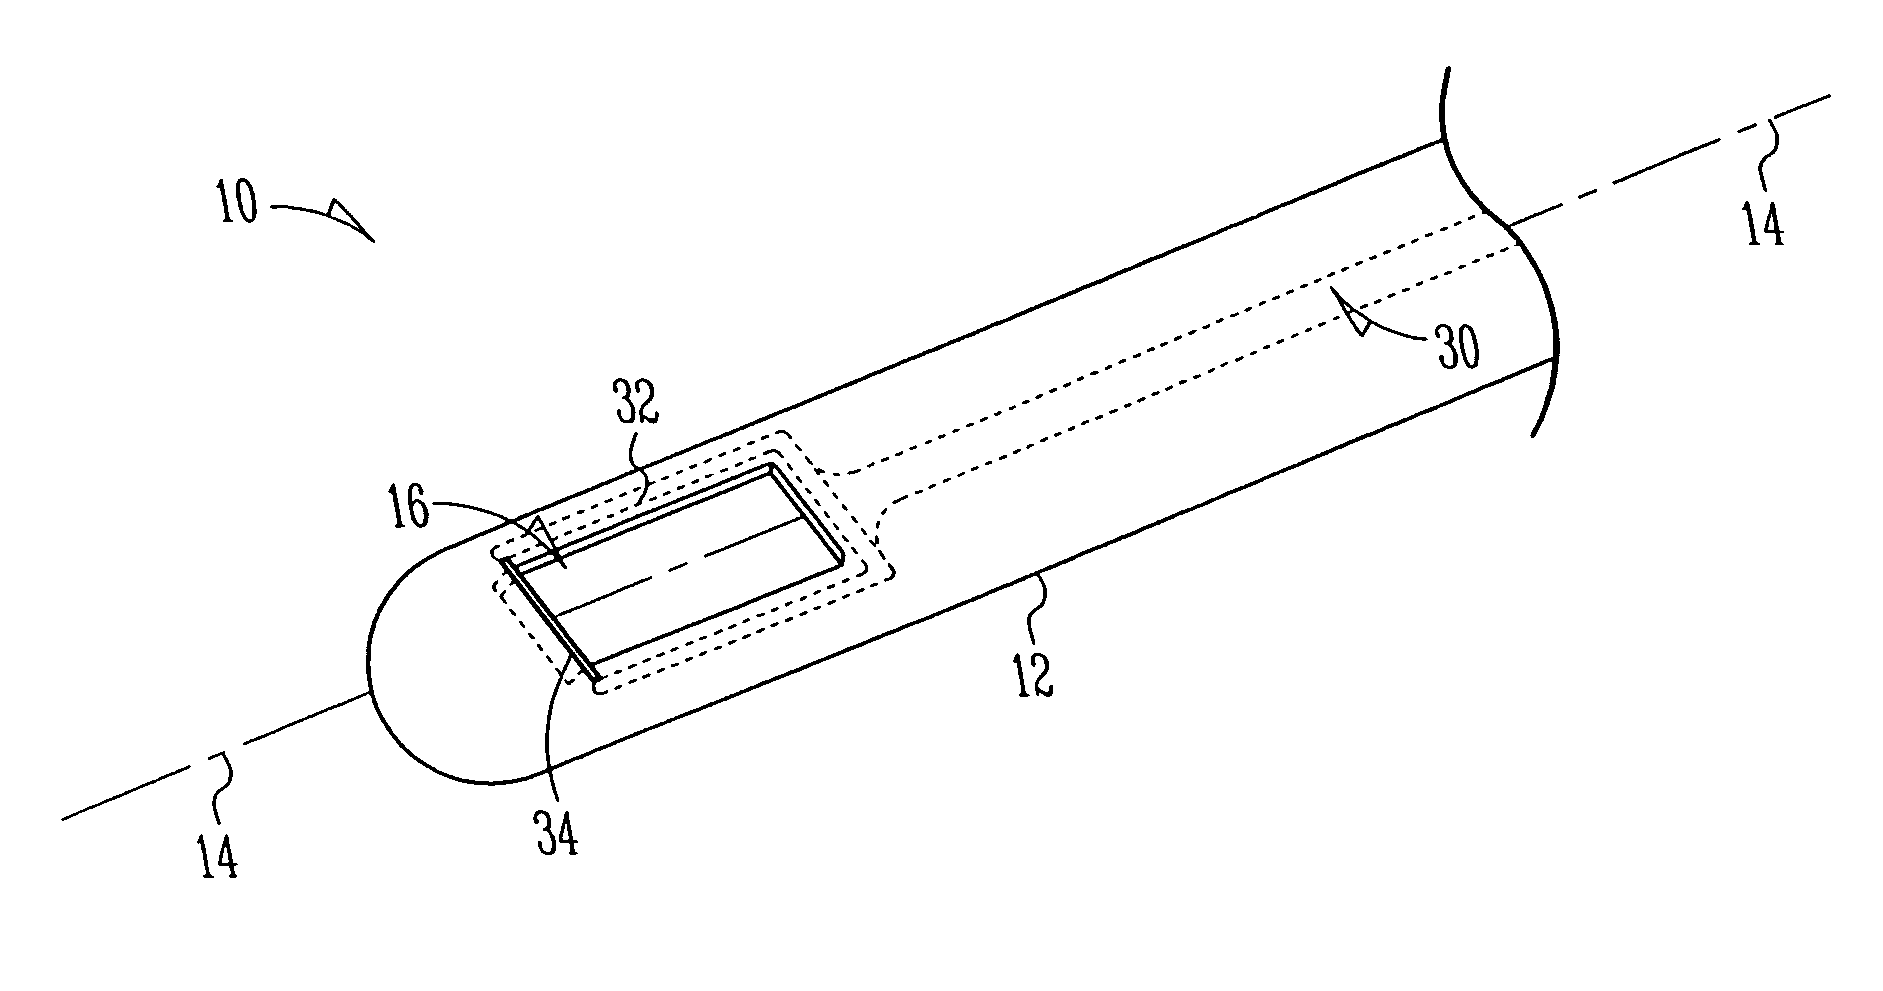 Method and apparatus for taking a biopsy